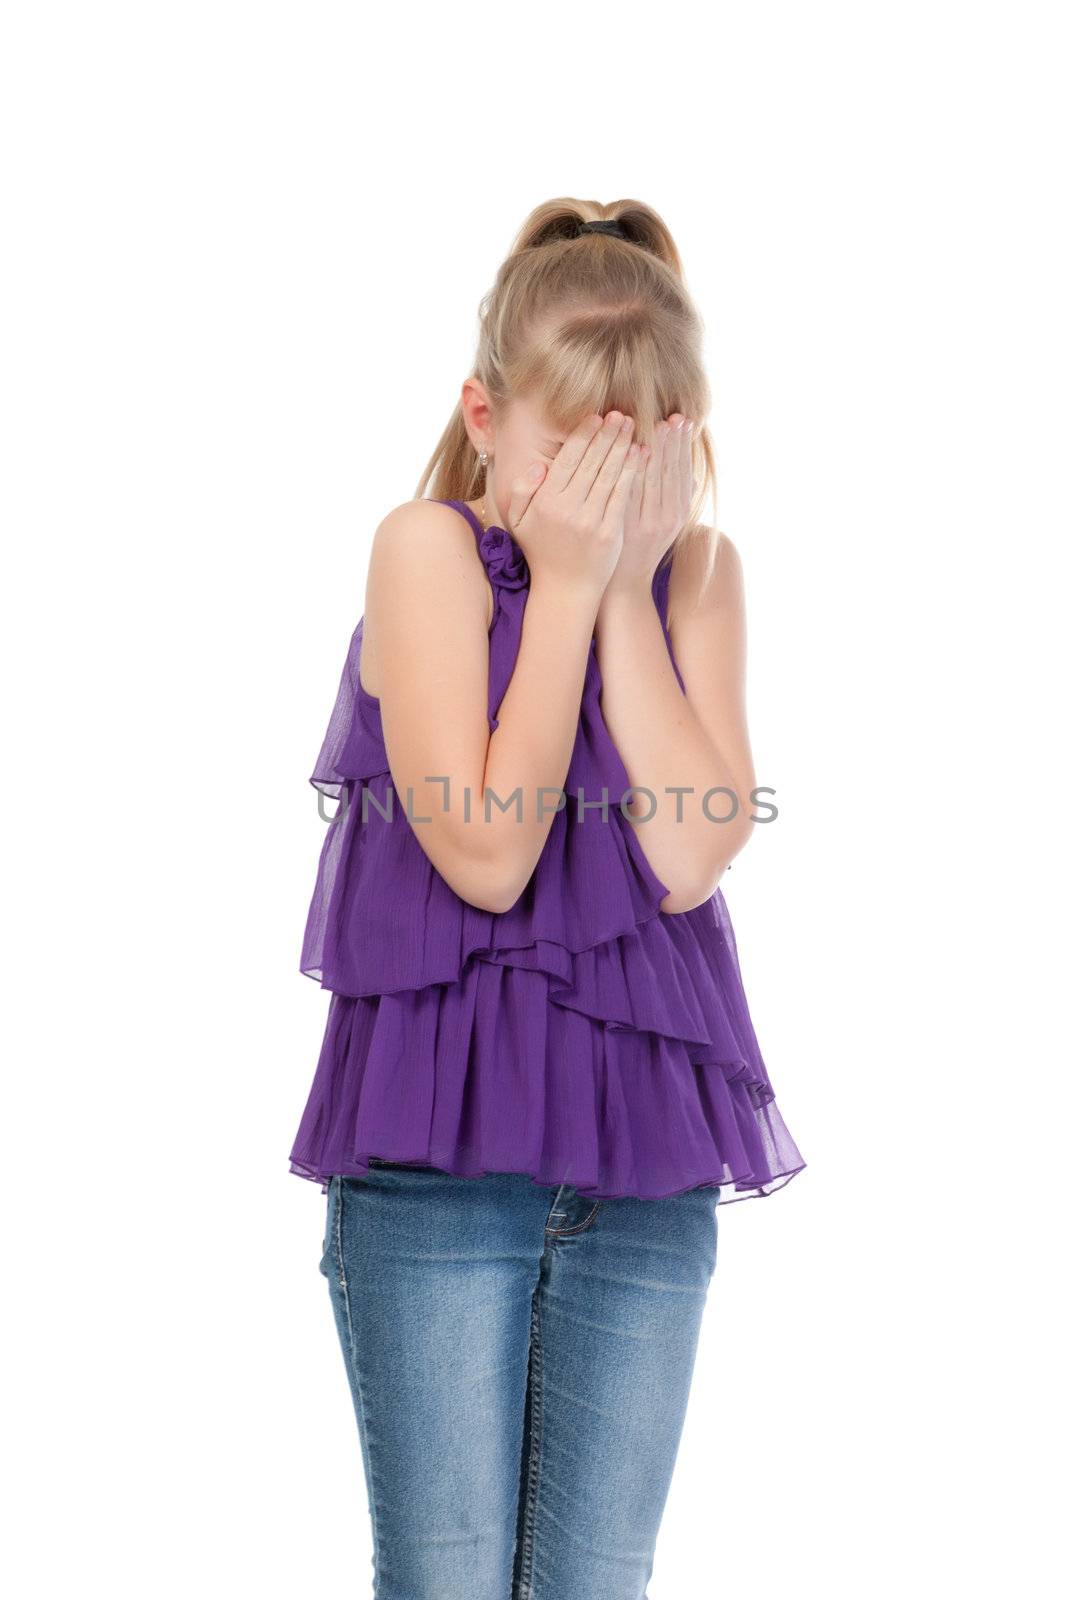 Young girl shyly covered her face with her hands, isolated on white background